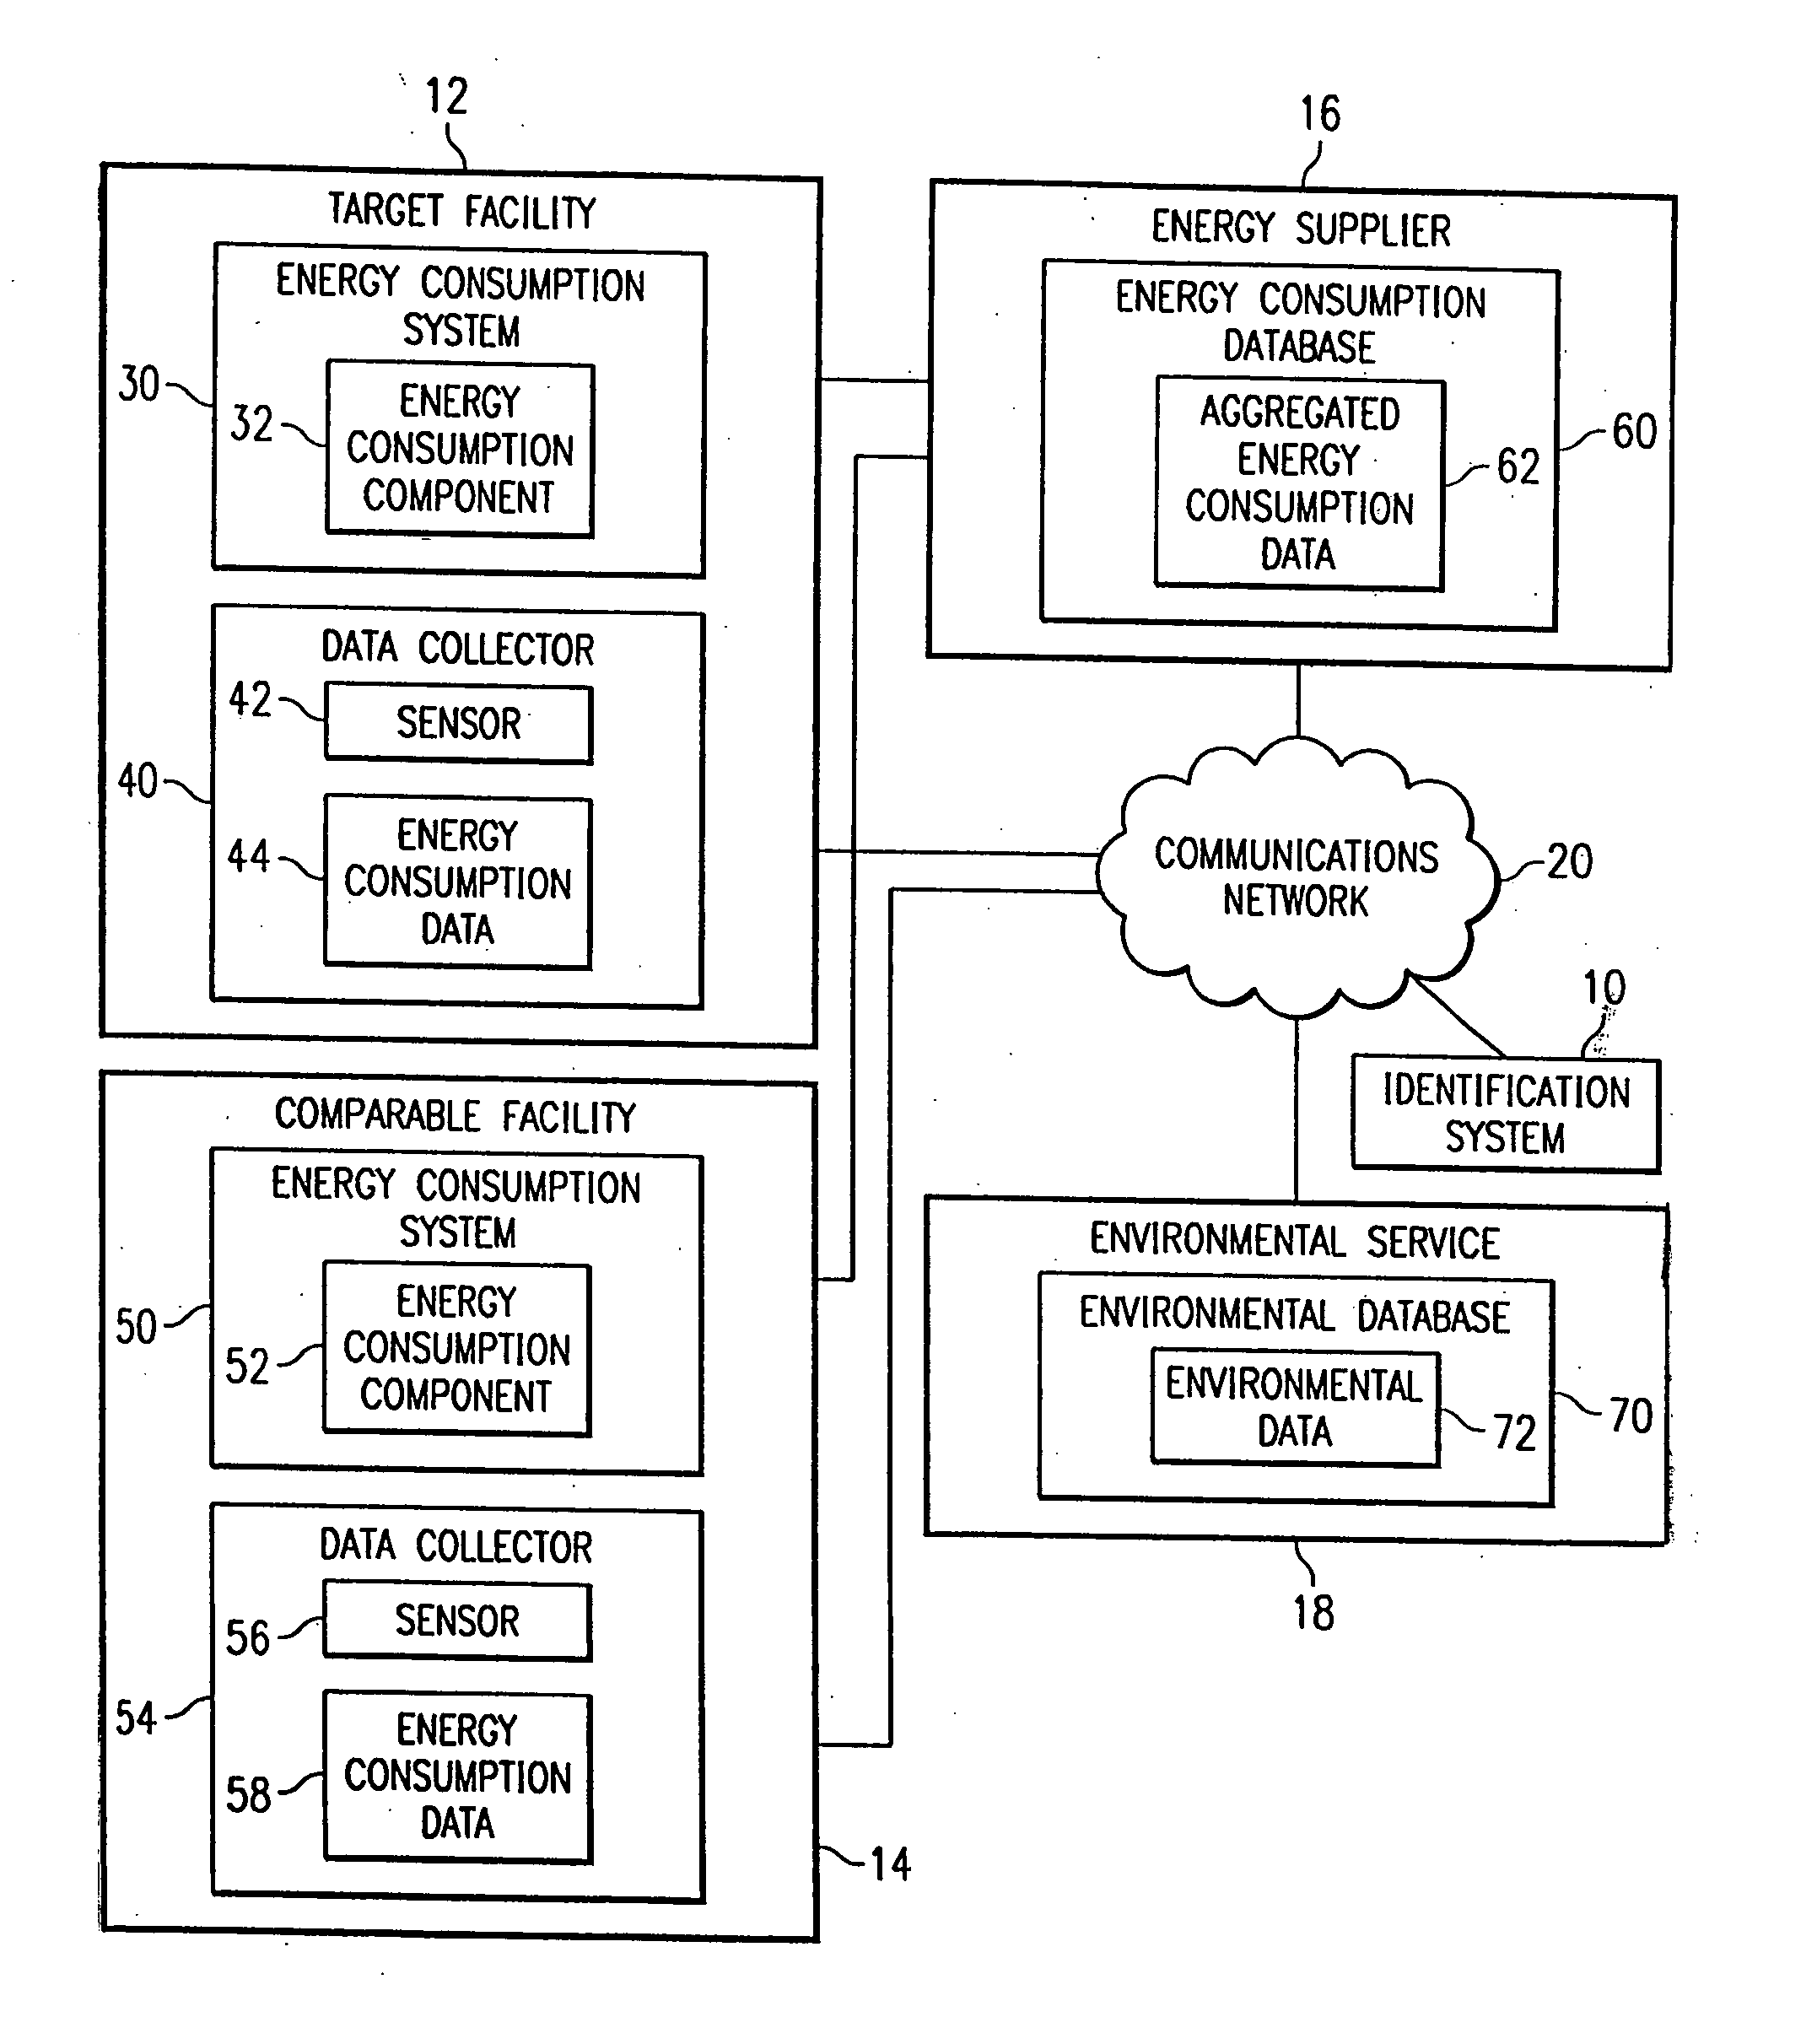 System and method for remote identification of energy consumption systems and components